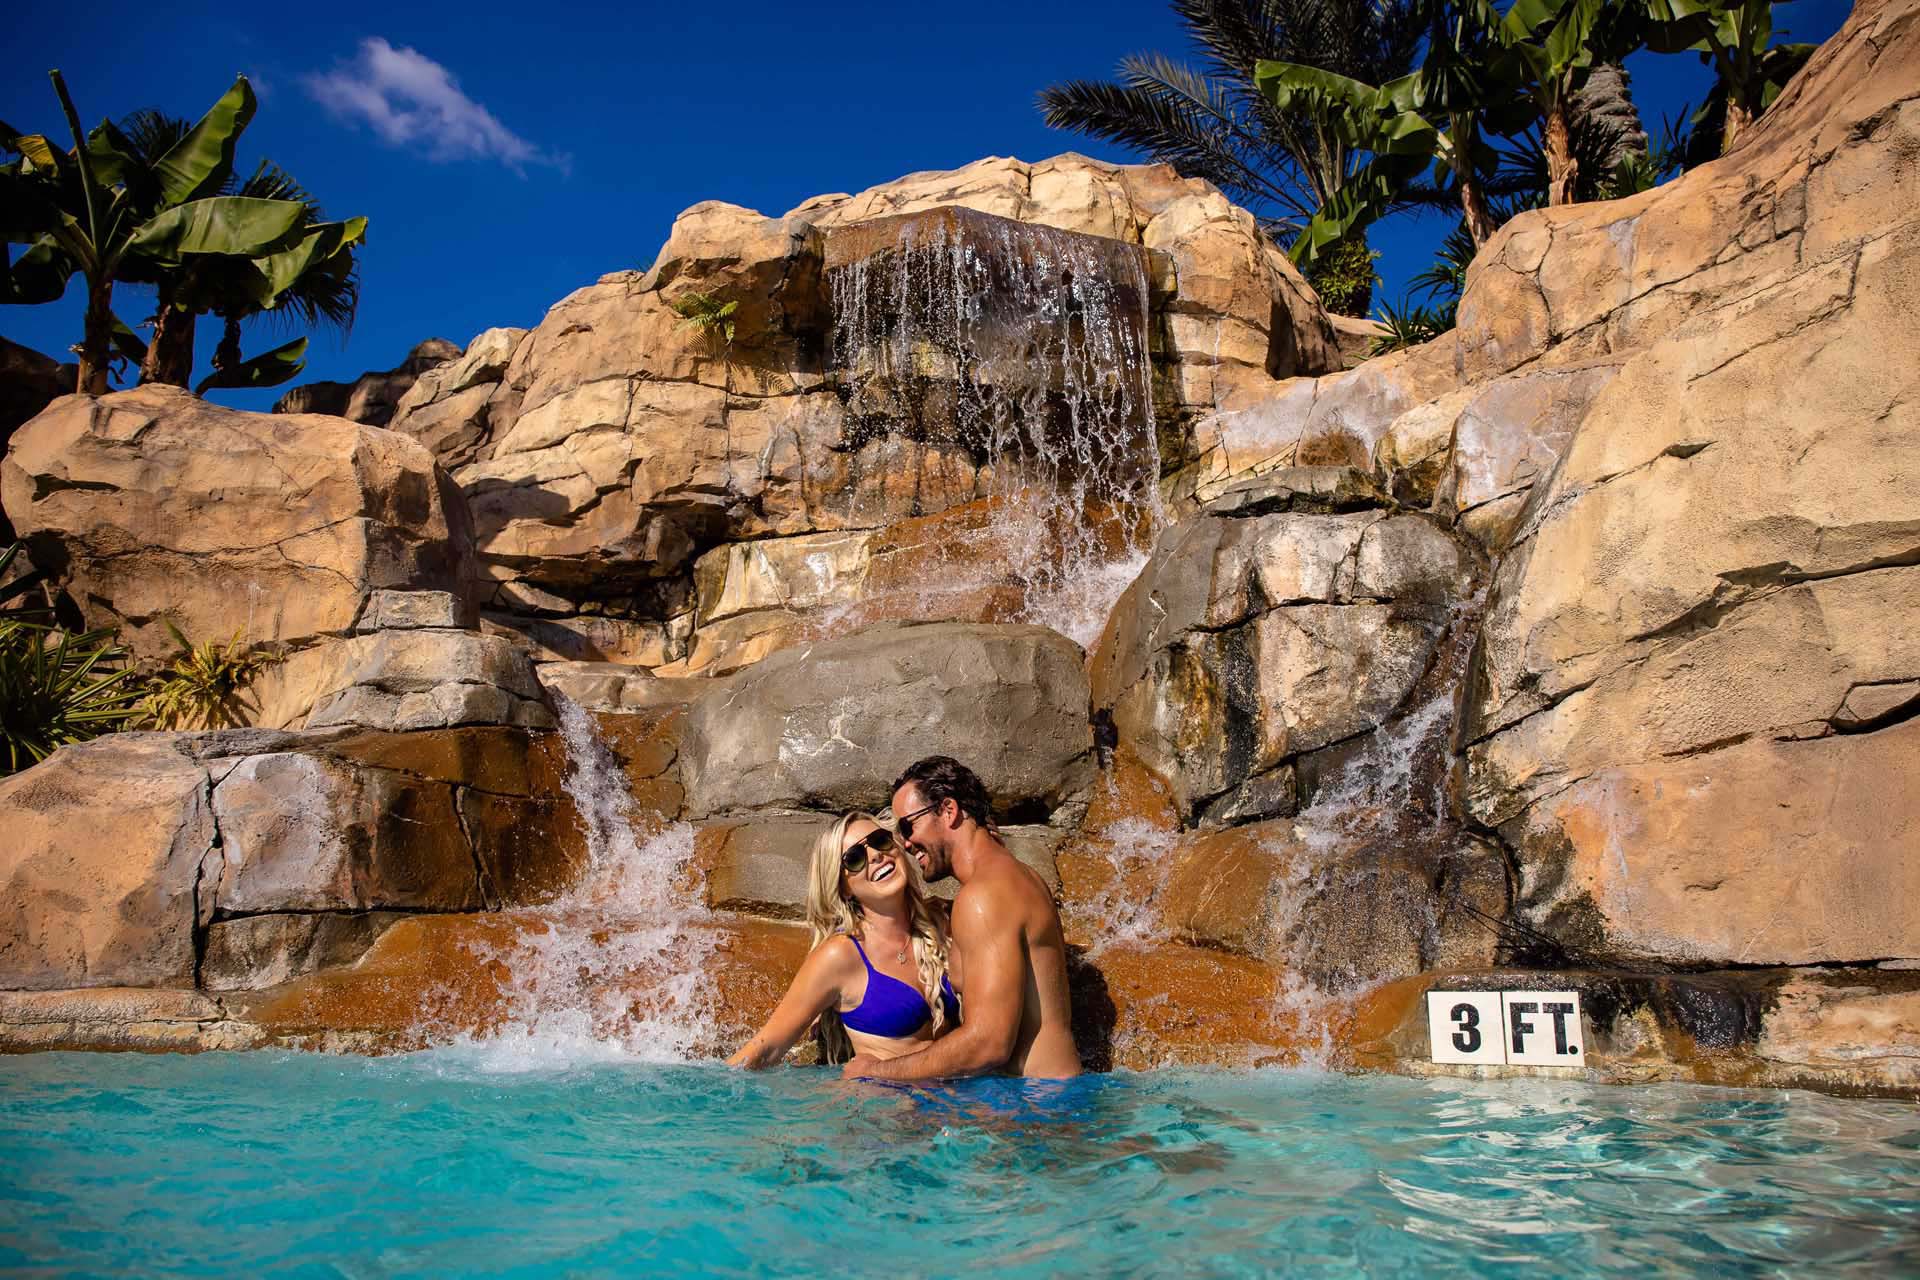 Couple enjoying time together in the pool next to a waterfall at the Reunion Resort Water Park